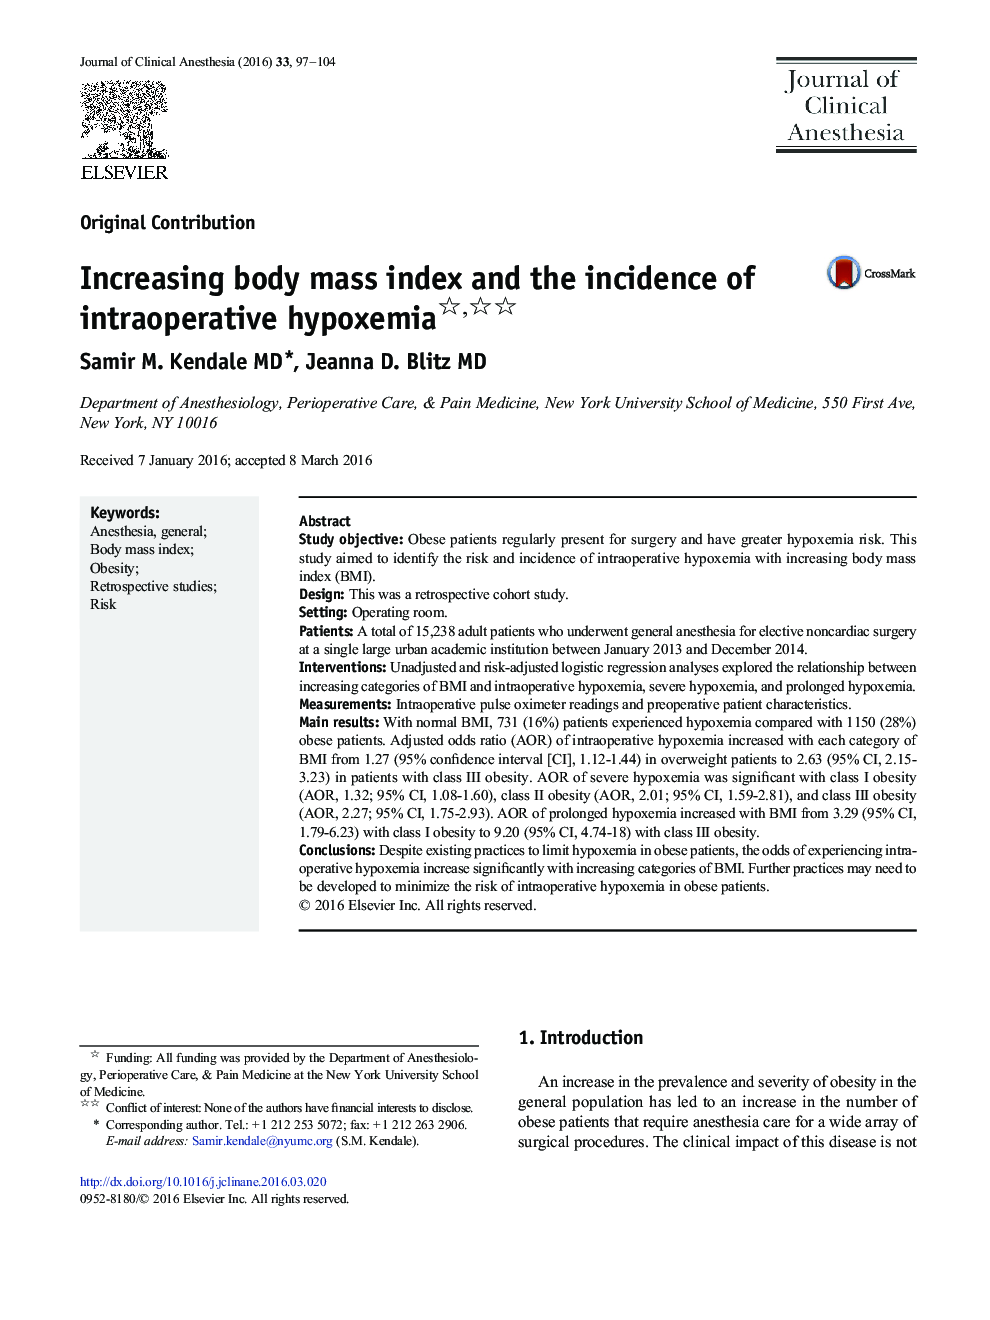 Increasing body mass index and the incidence of intraoperative hypoxemia 